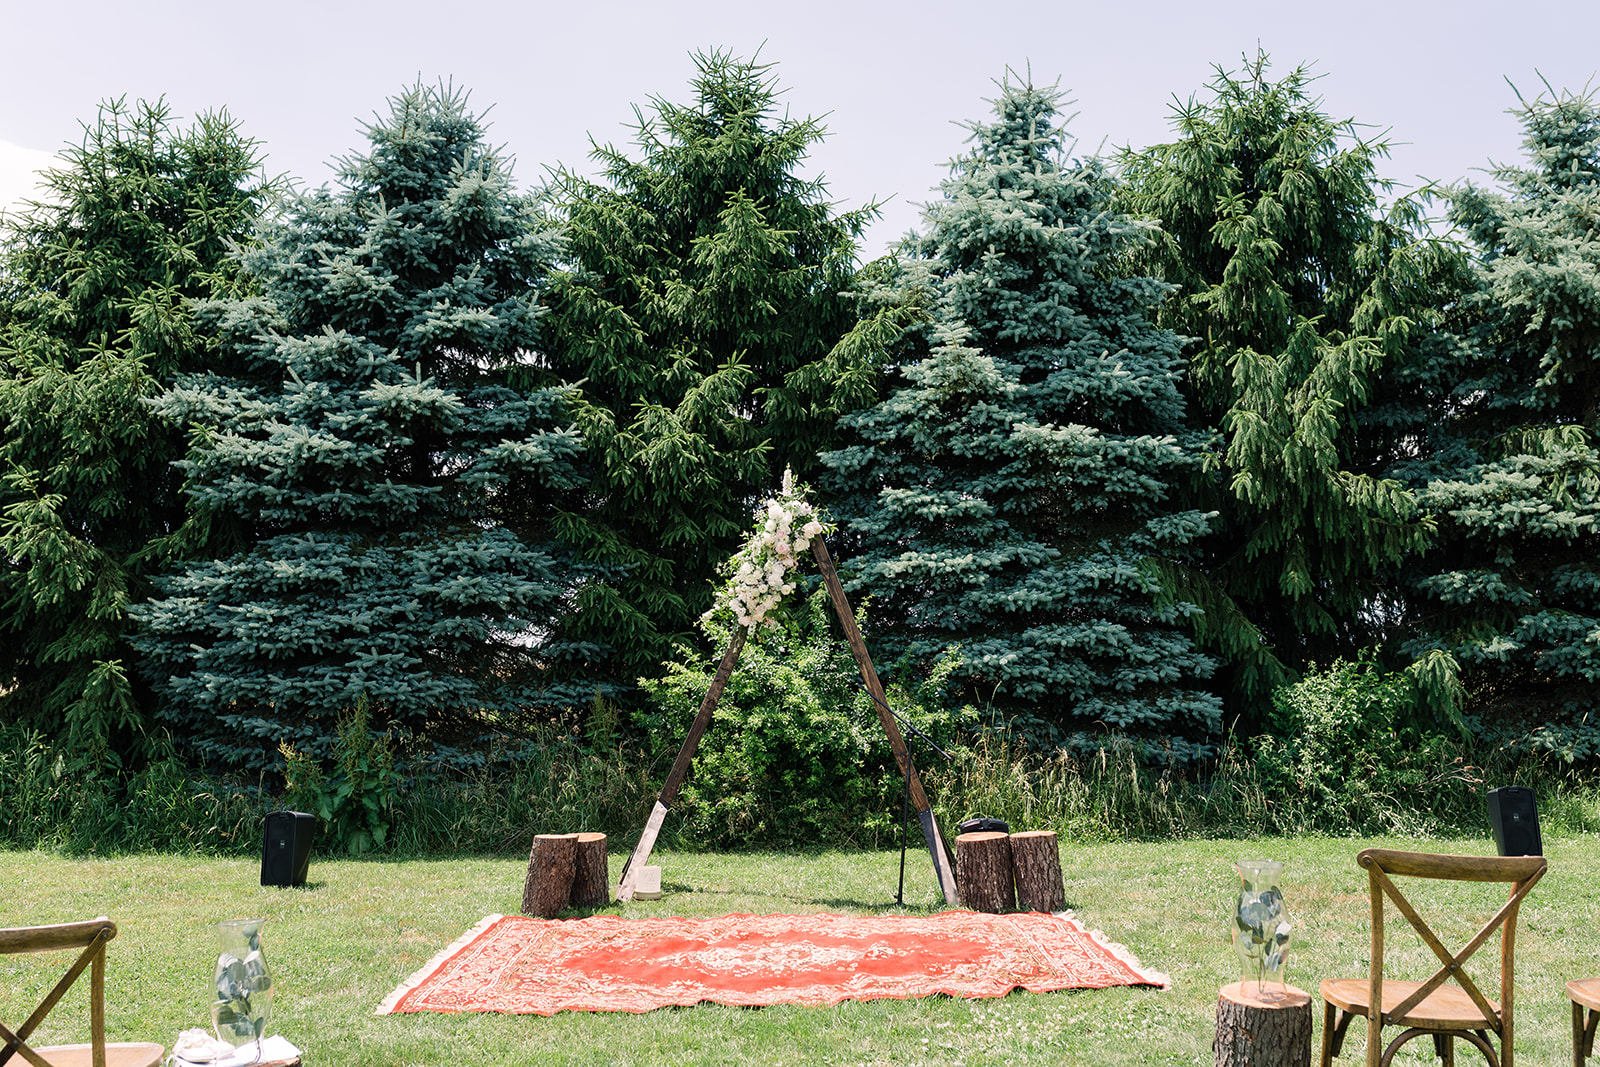 A couple had an intimate bohemian wedding in the countryside of Northeast Ohio